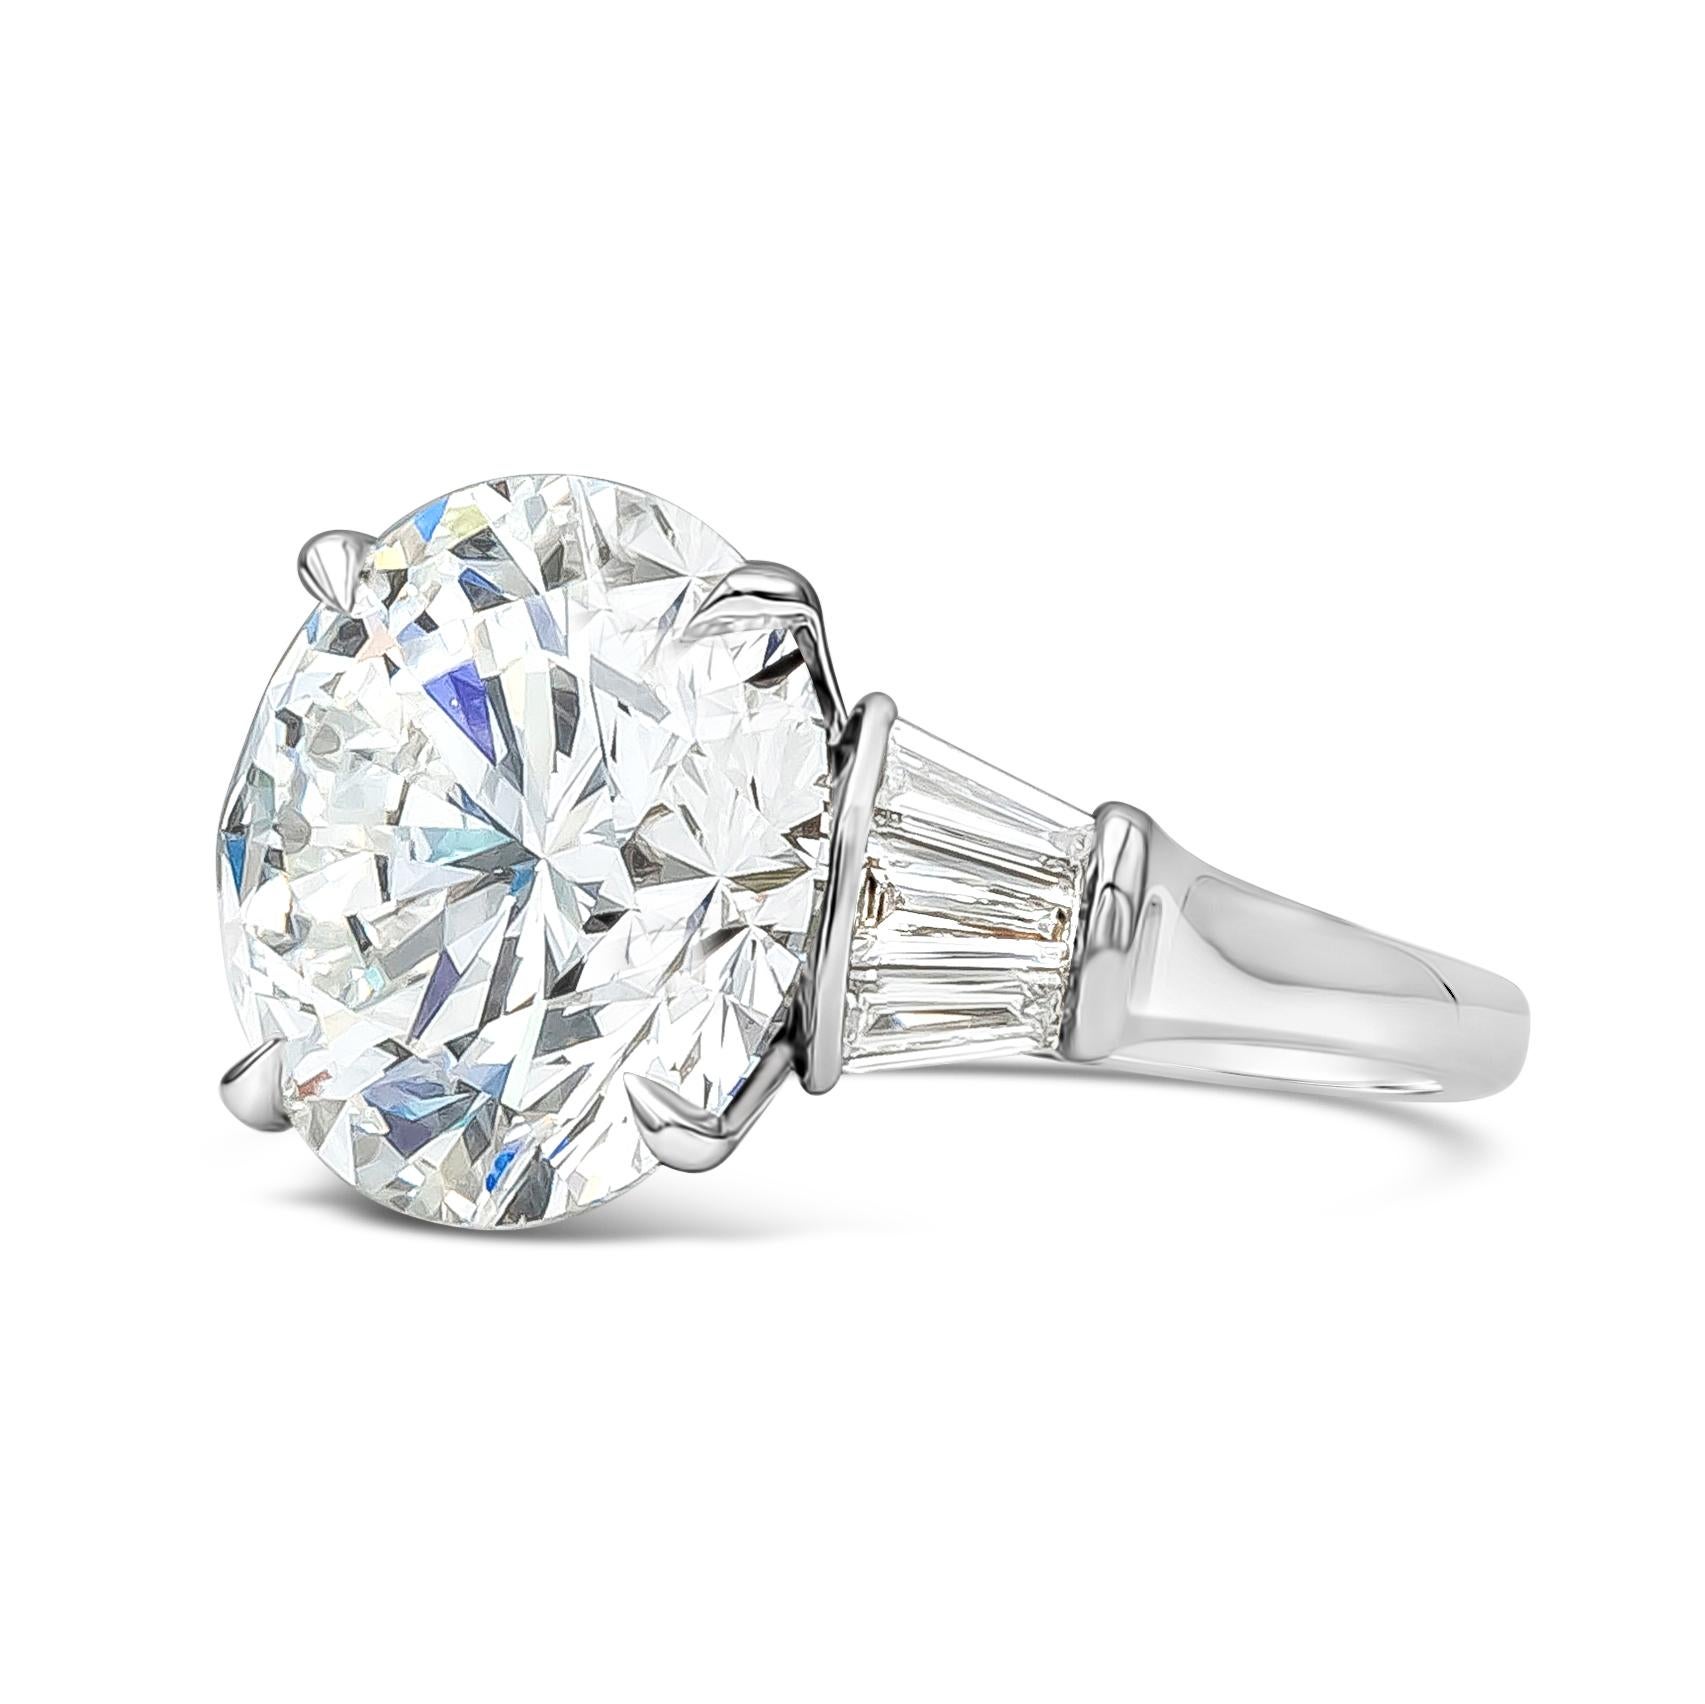 This gorgeous important engagement ring features a GIA Certified 12.03 carat brilliant round shape diamond, F in Color and VS1 in Clarity, flanked by 3 tapered baguettes on each side weighing 0.98 carats total, F Color and VS in Clarity. Finely Made